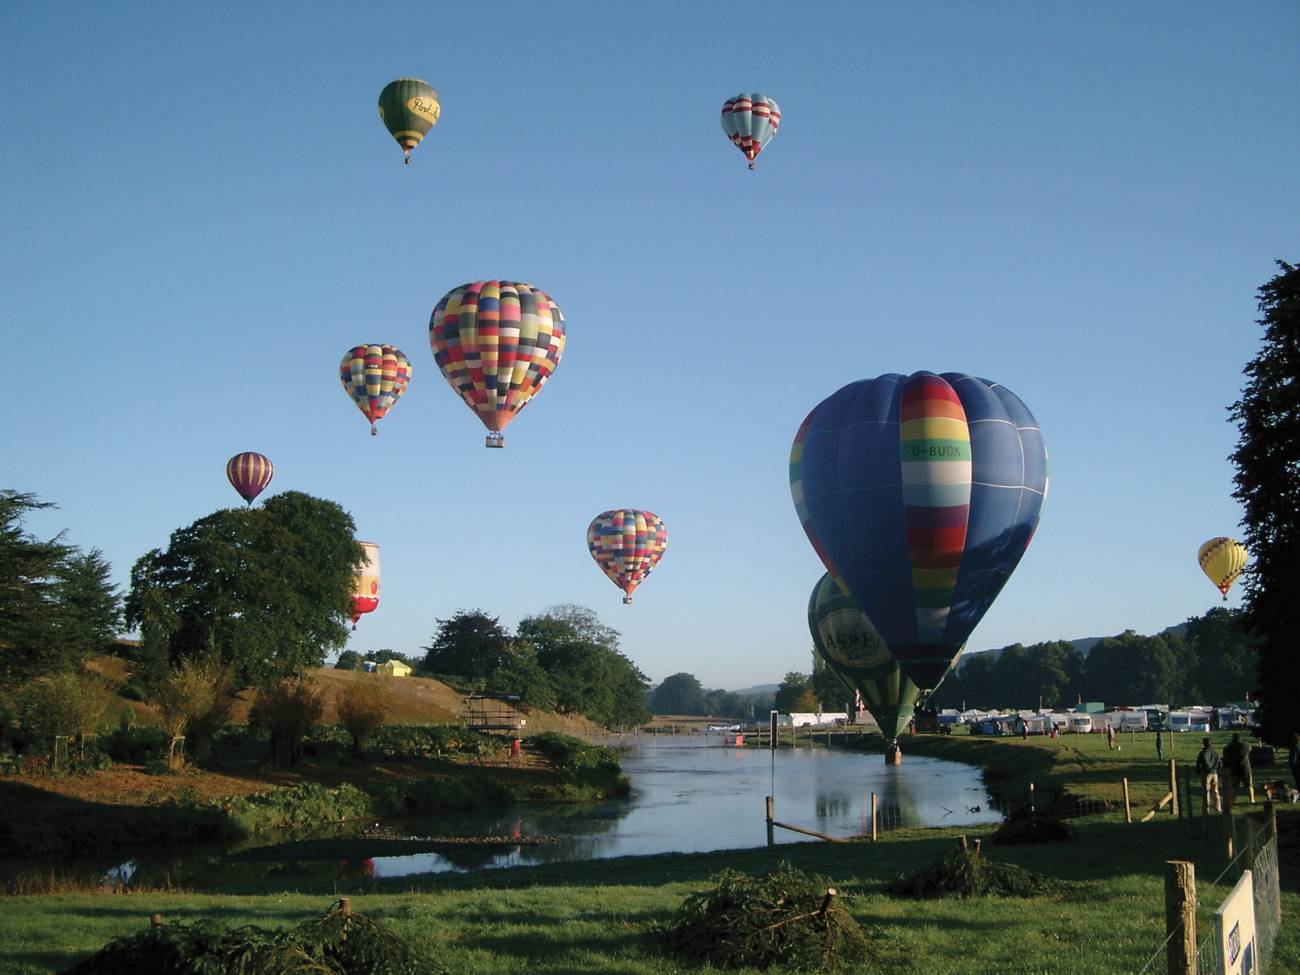 Win Two Tickets to Chatsworth Country Fair | A Giveaway